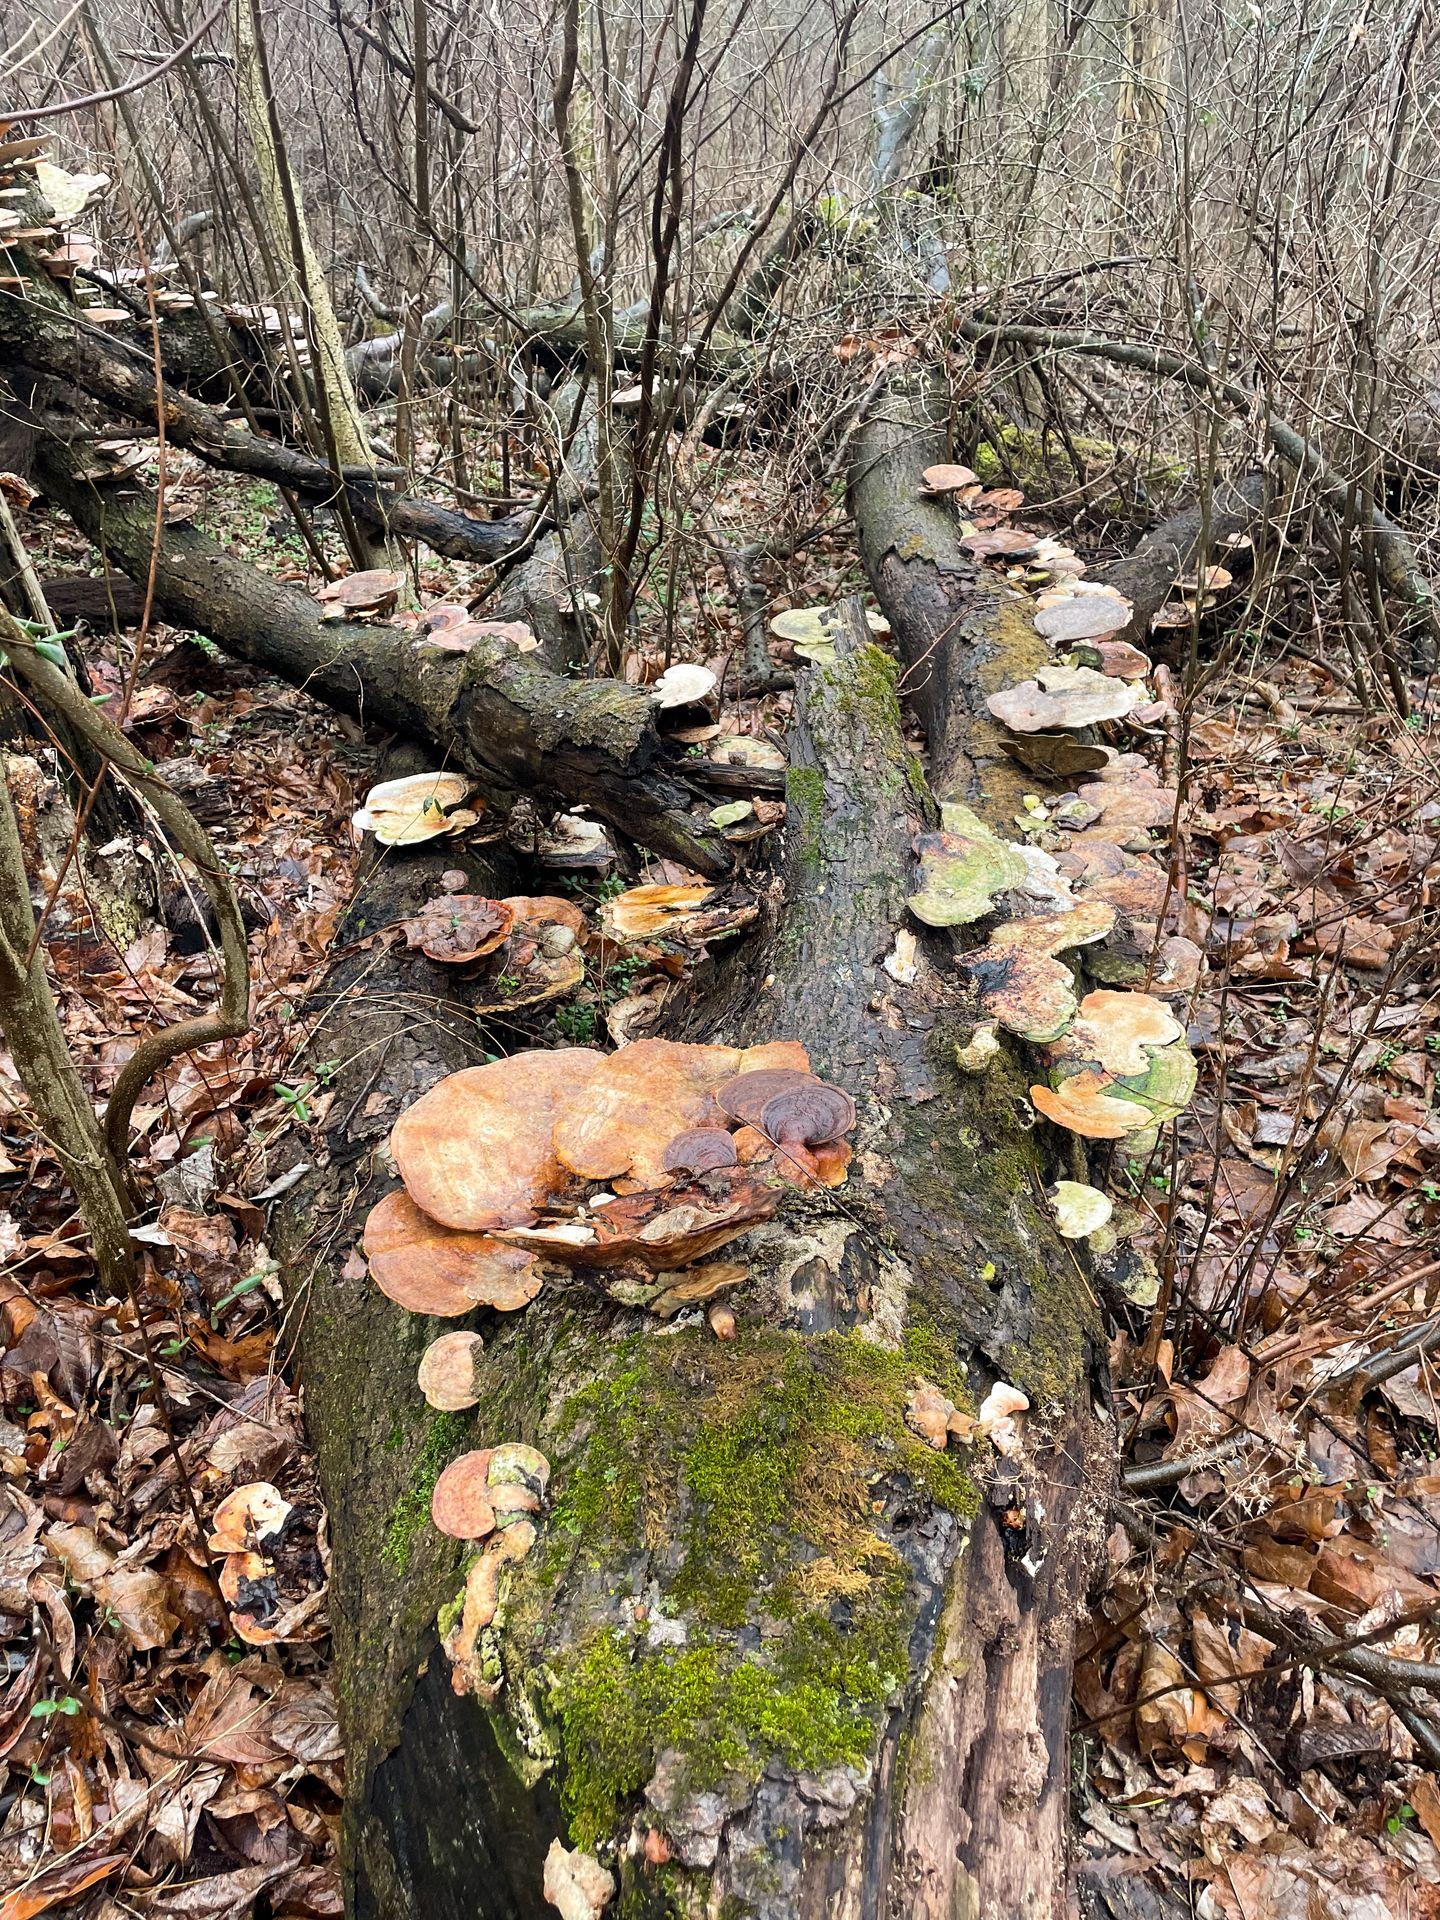 Mushrooms covering a log at Shawnee Lookout